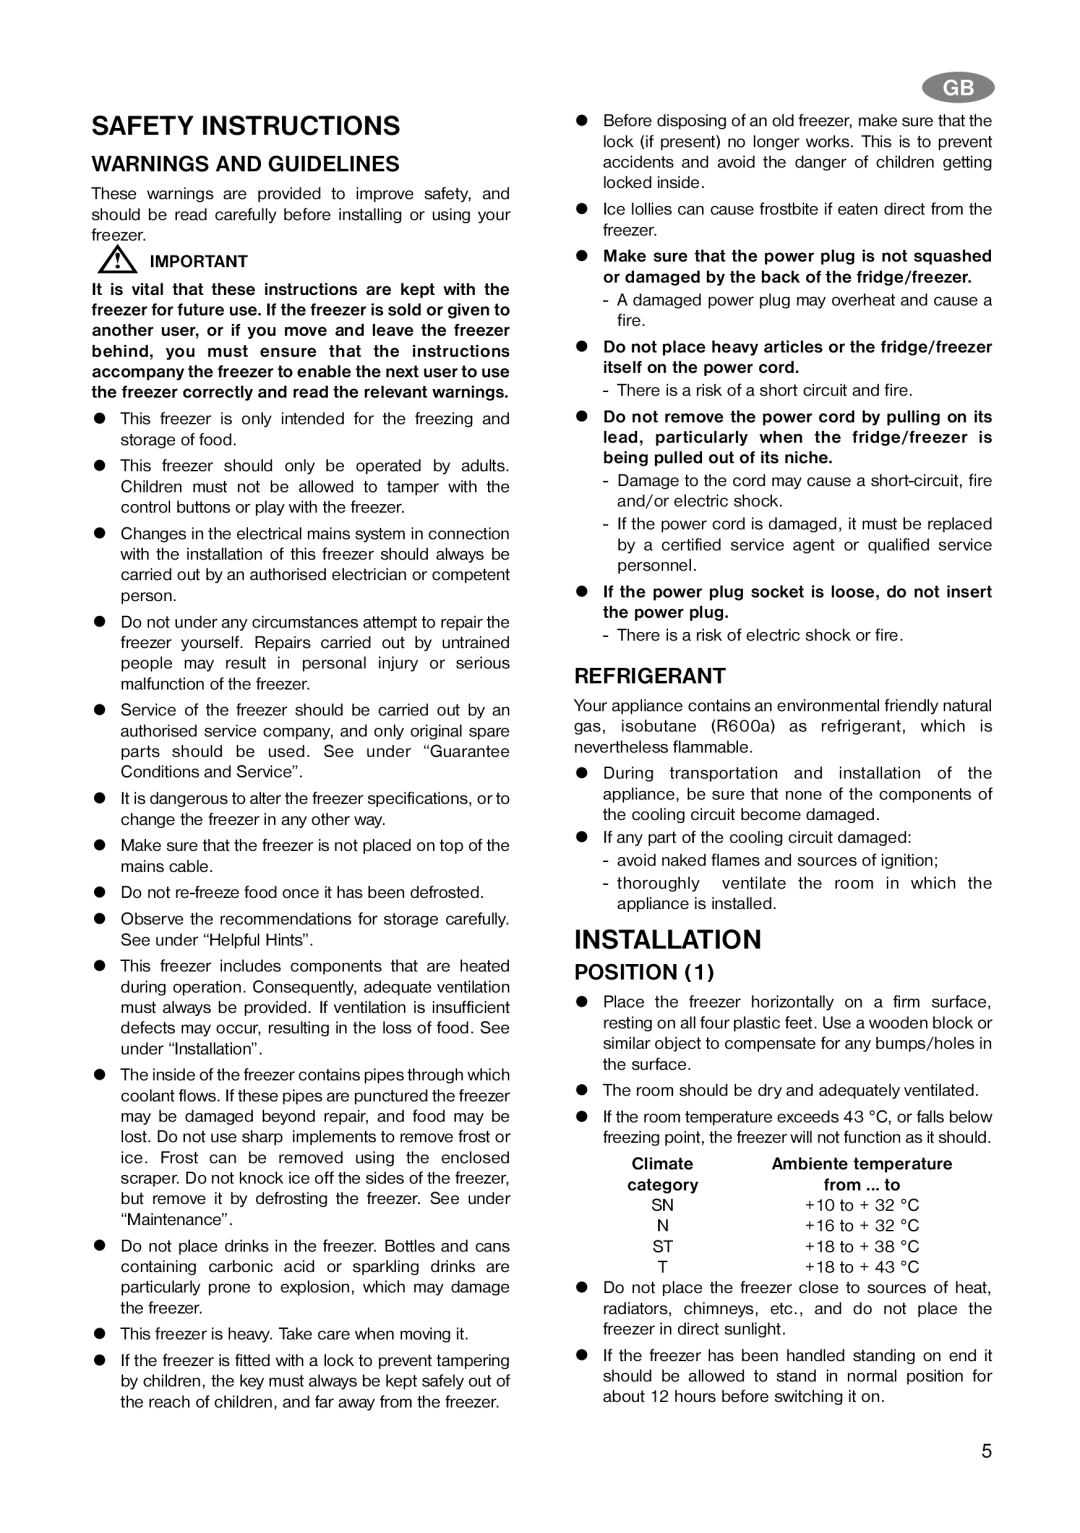 Electrolux ECN 5157, ECN 4157 Safety Instructions, Installation, Warnings And Guidelines, Refrigerant, Position 